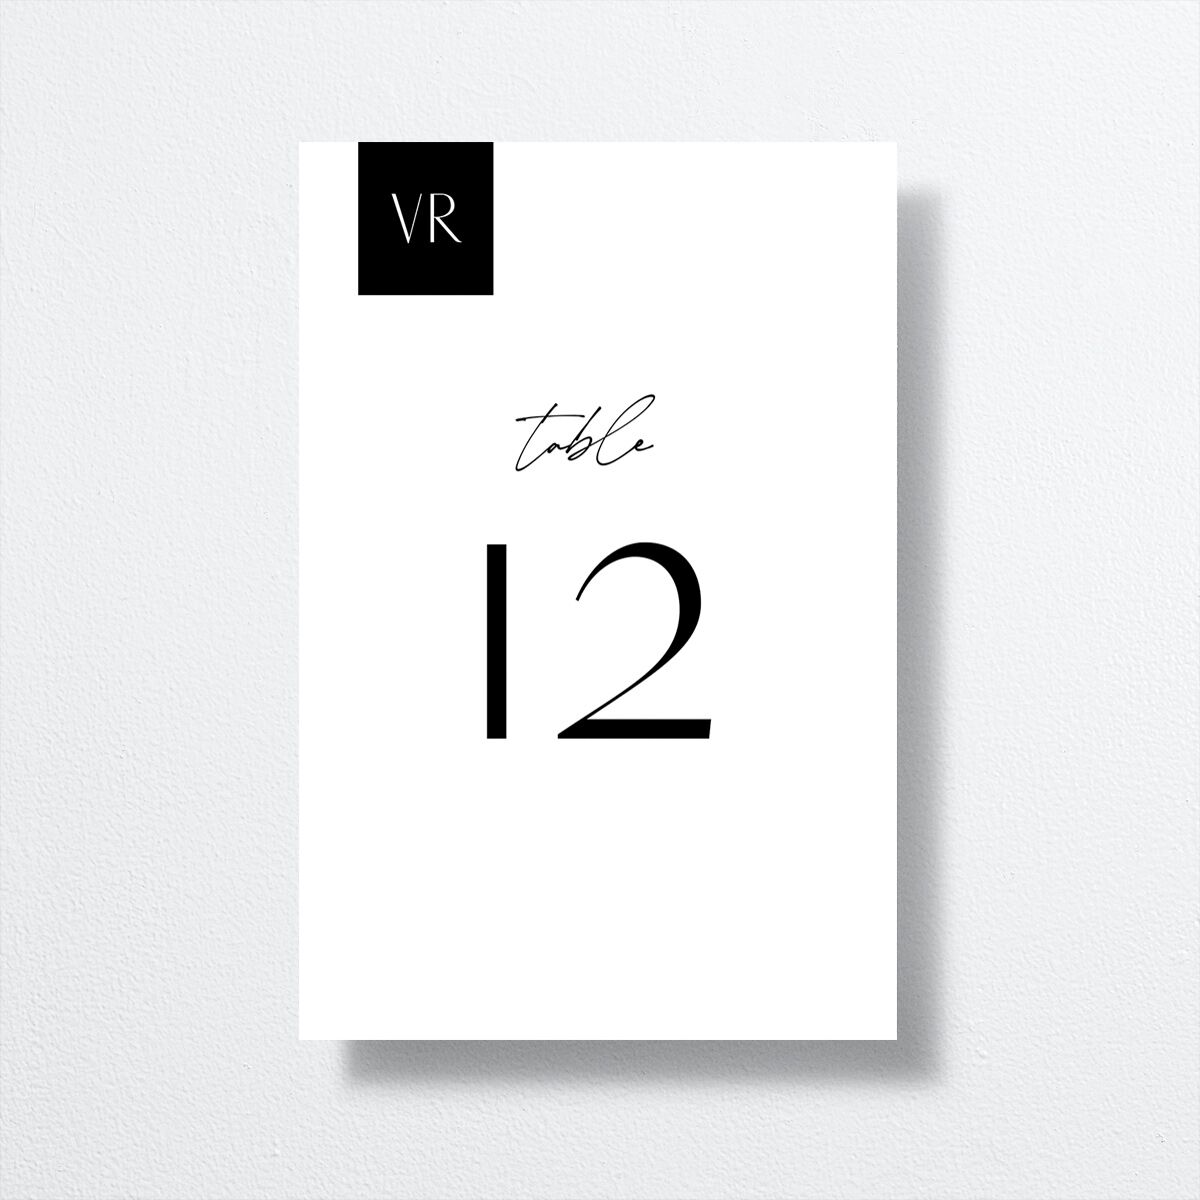 Our Time Table Numbers by Vera Wang front